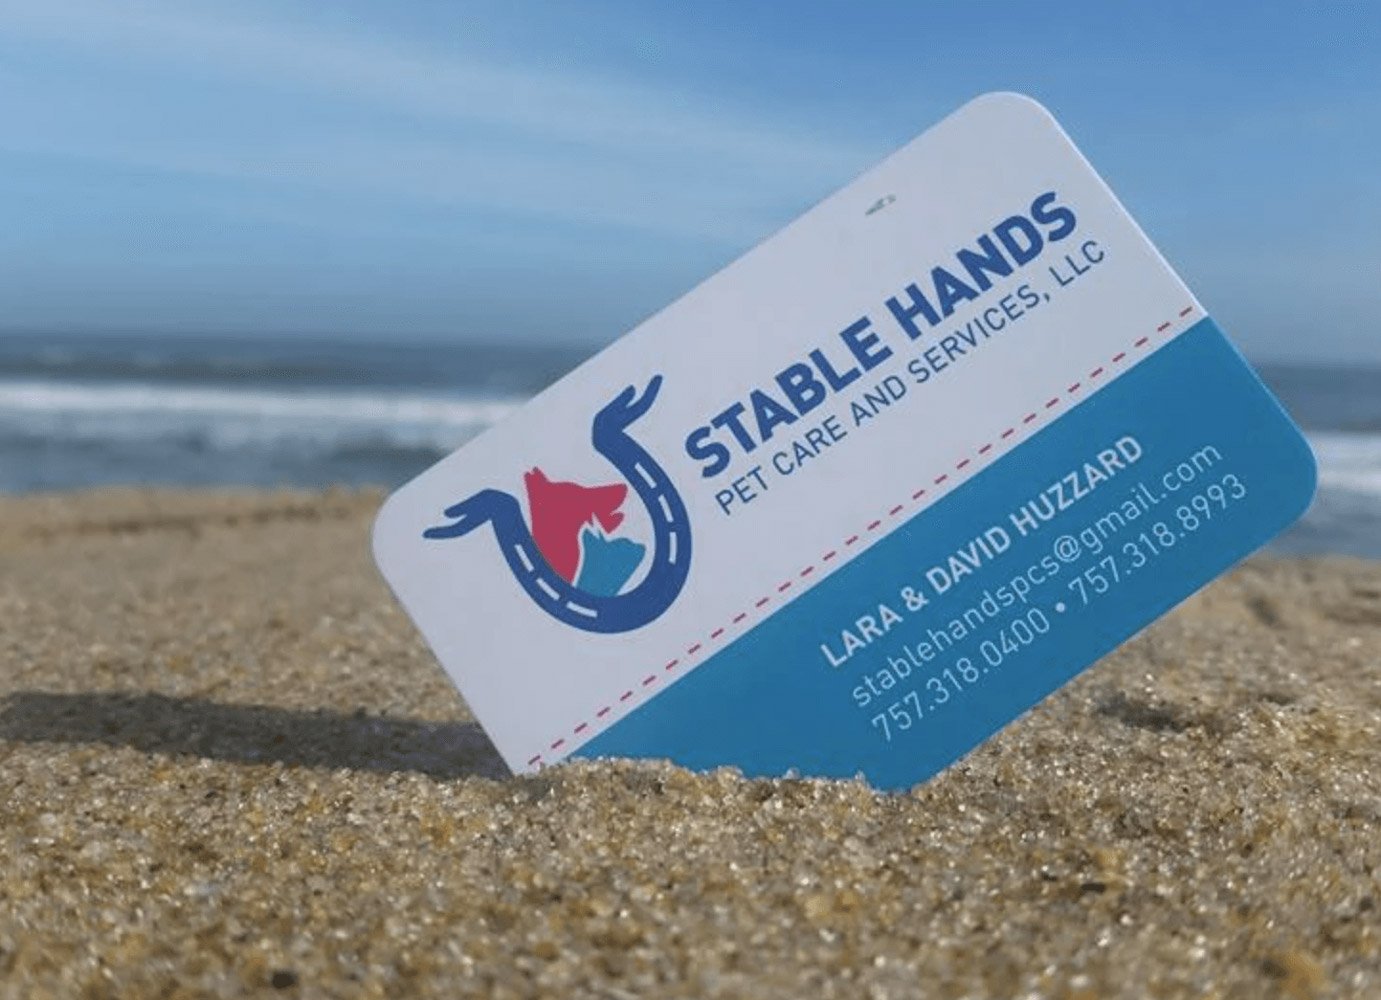 Stable Hands Pet Care and Services Business Card